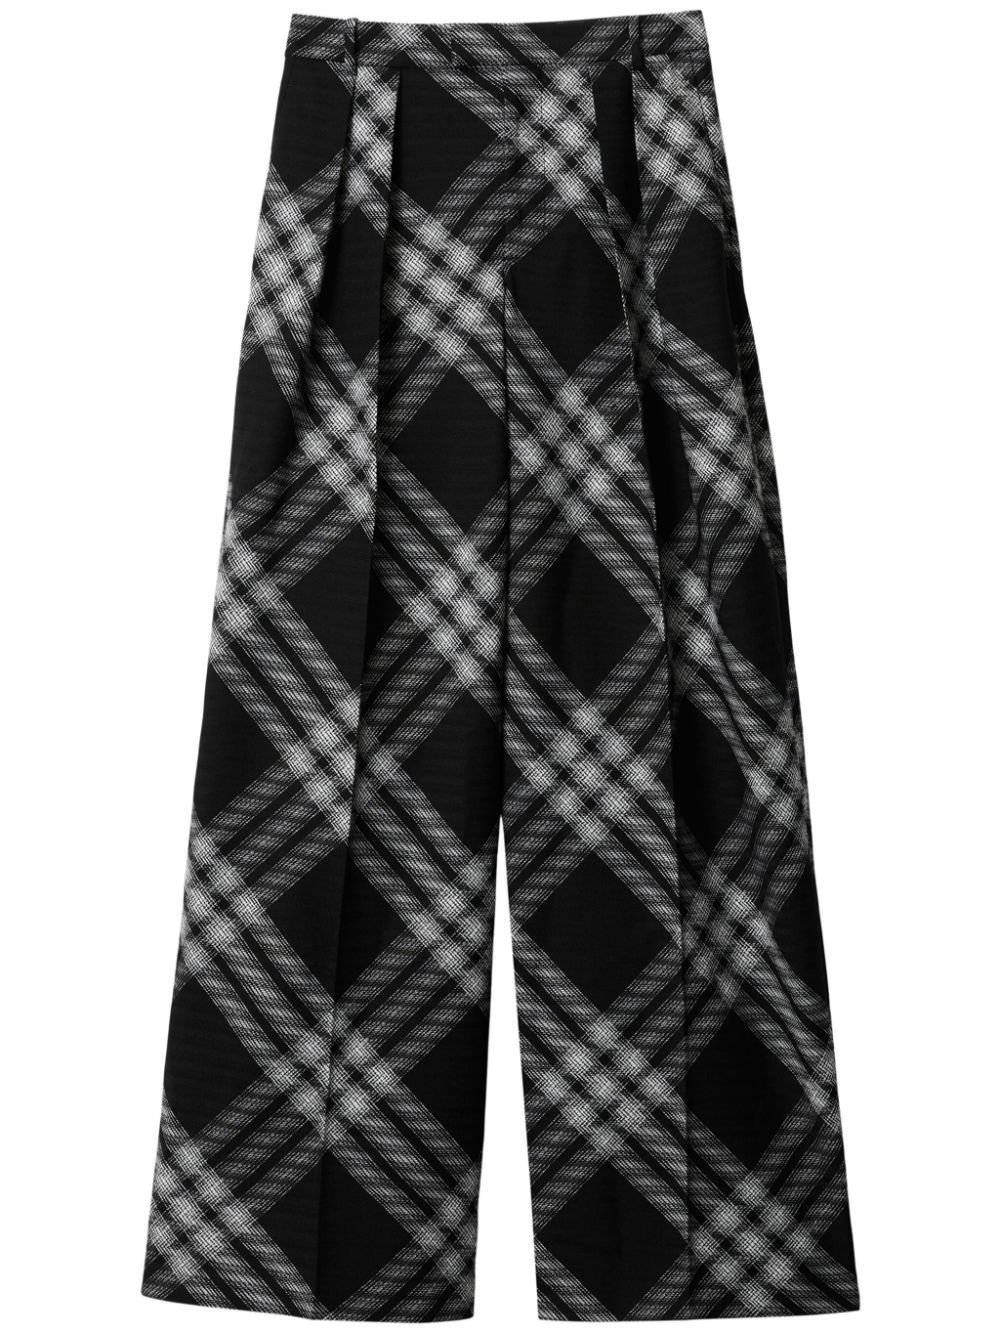 Vintage Check wool trousers - 1